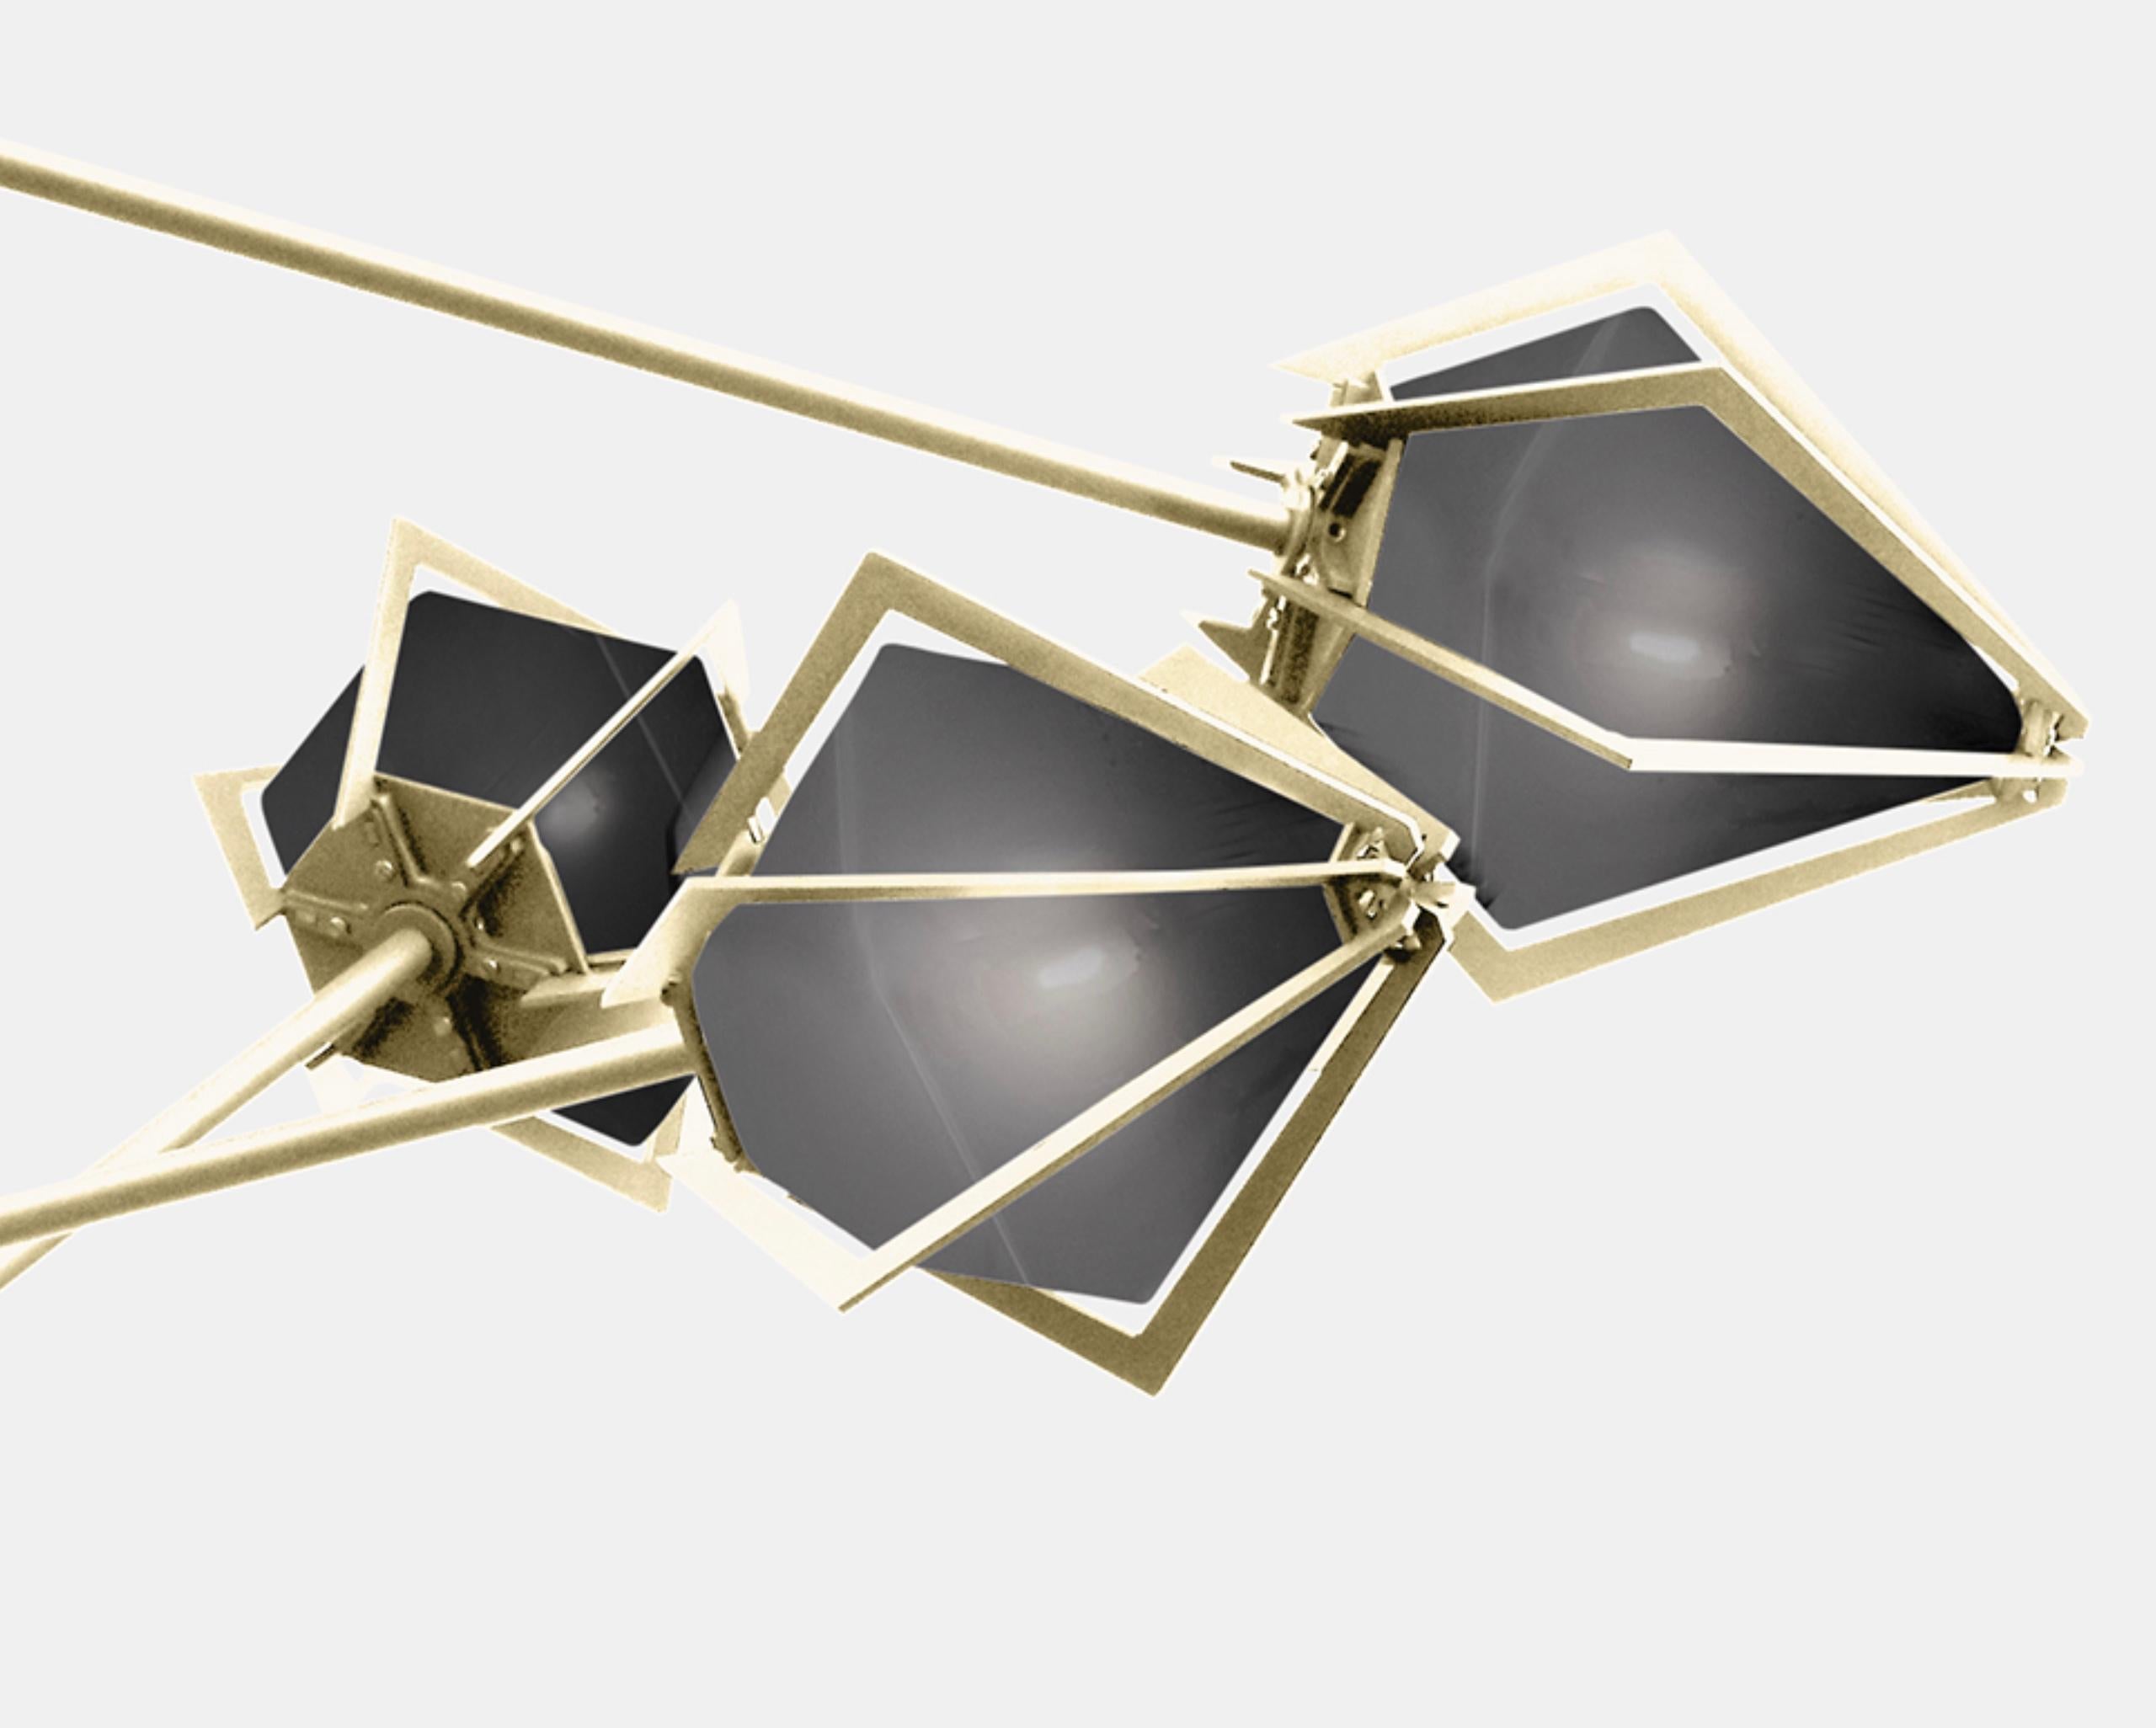 Harlow Spoke Chandelier Small in Satin Brass and Smoked Gray Glass In New Condition For Sale In New York, NY